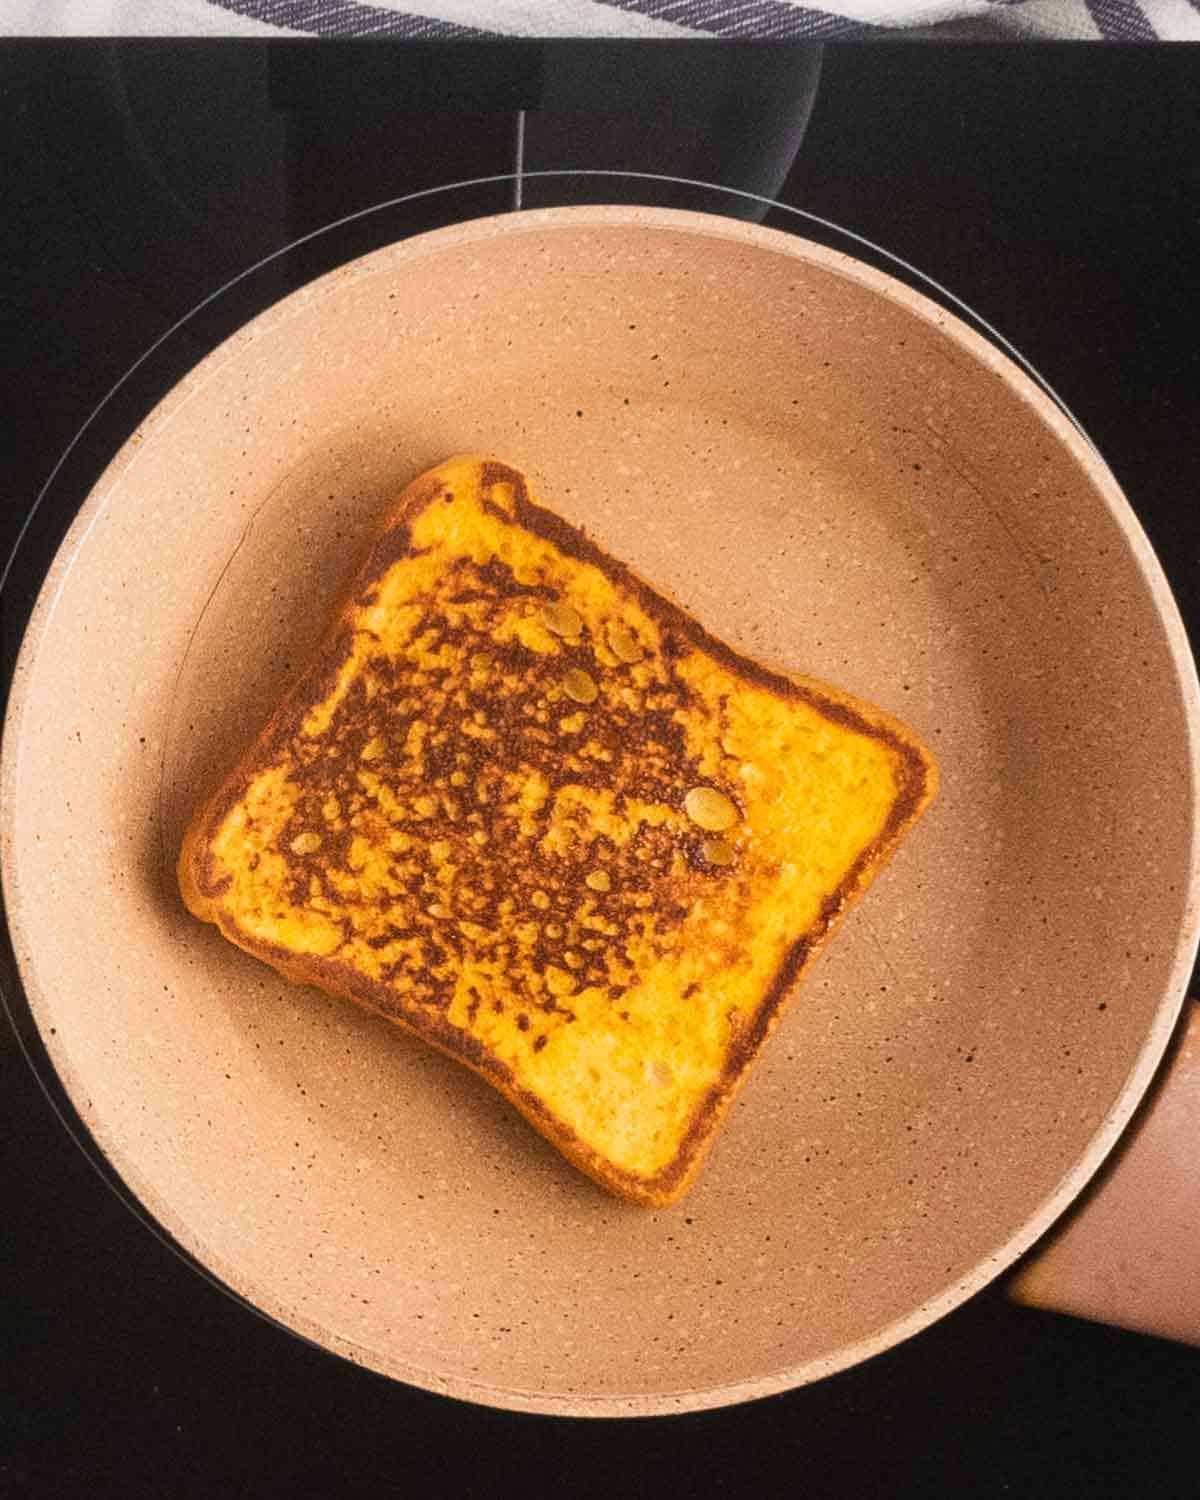 A golden brown french toast in a frying pan.